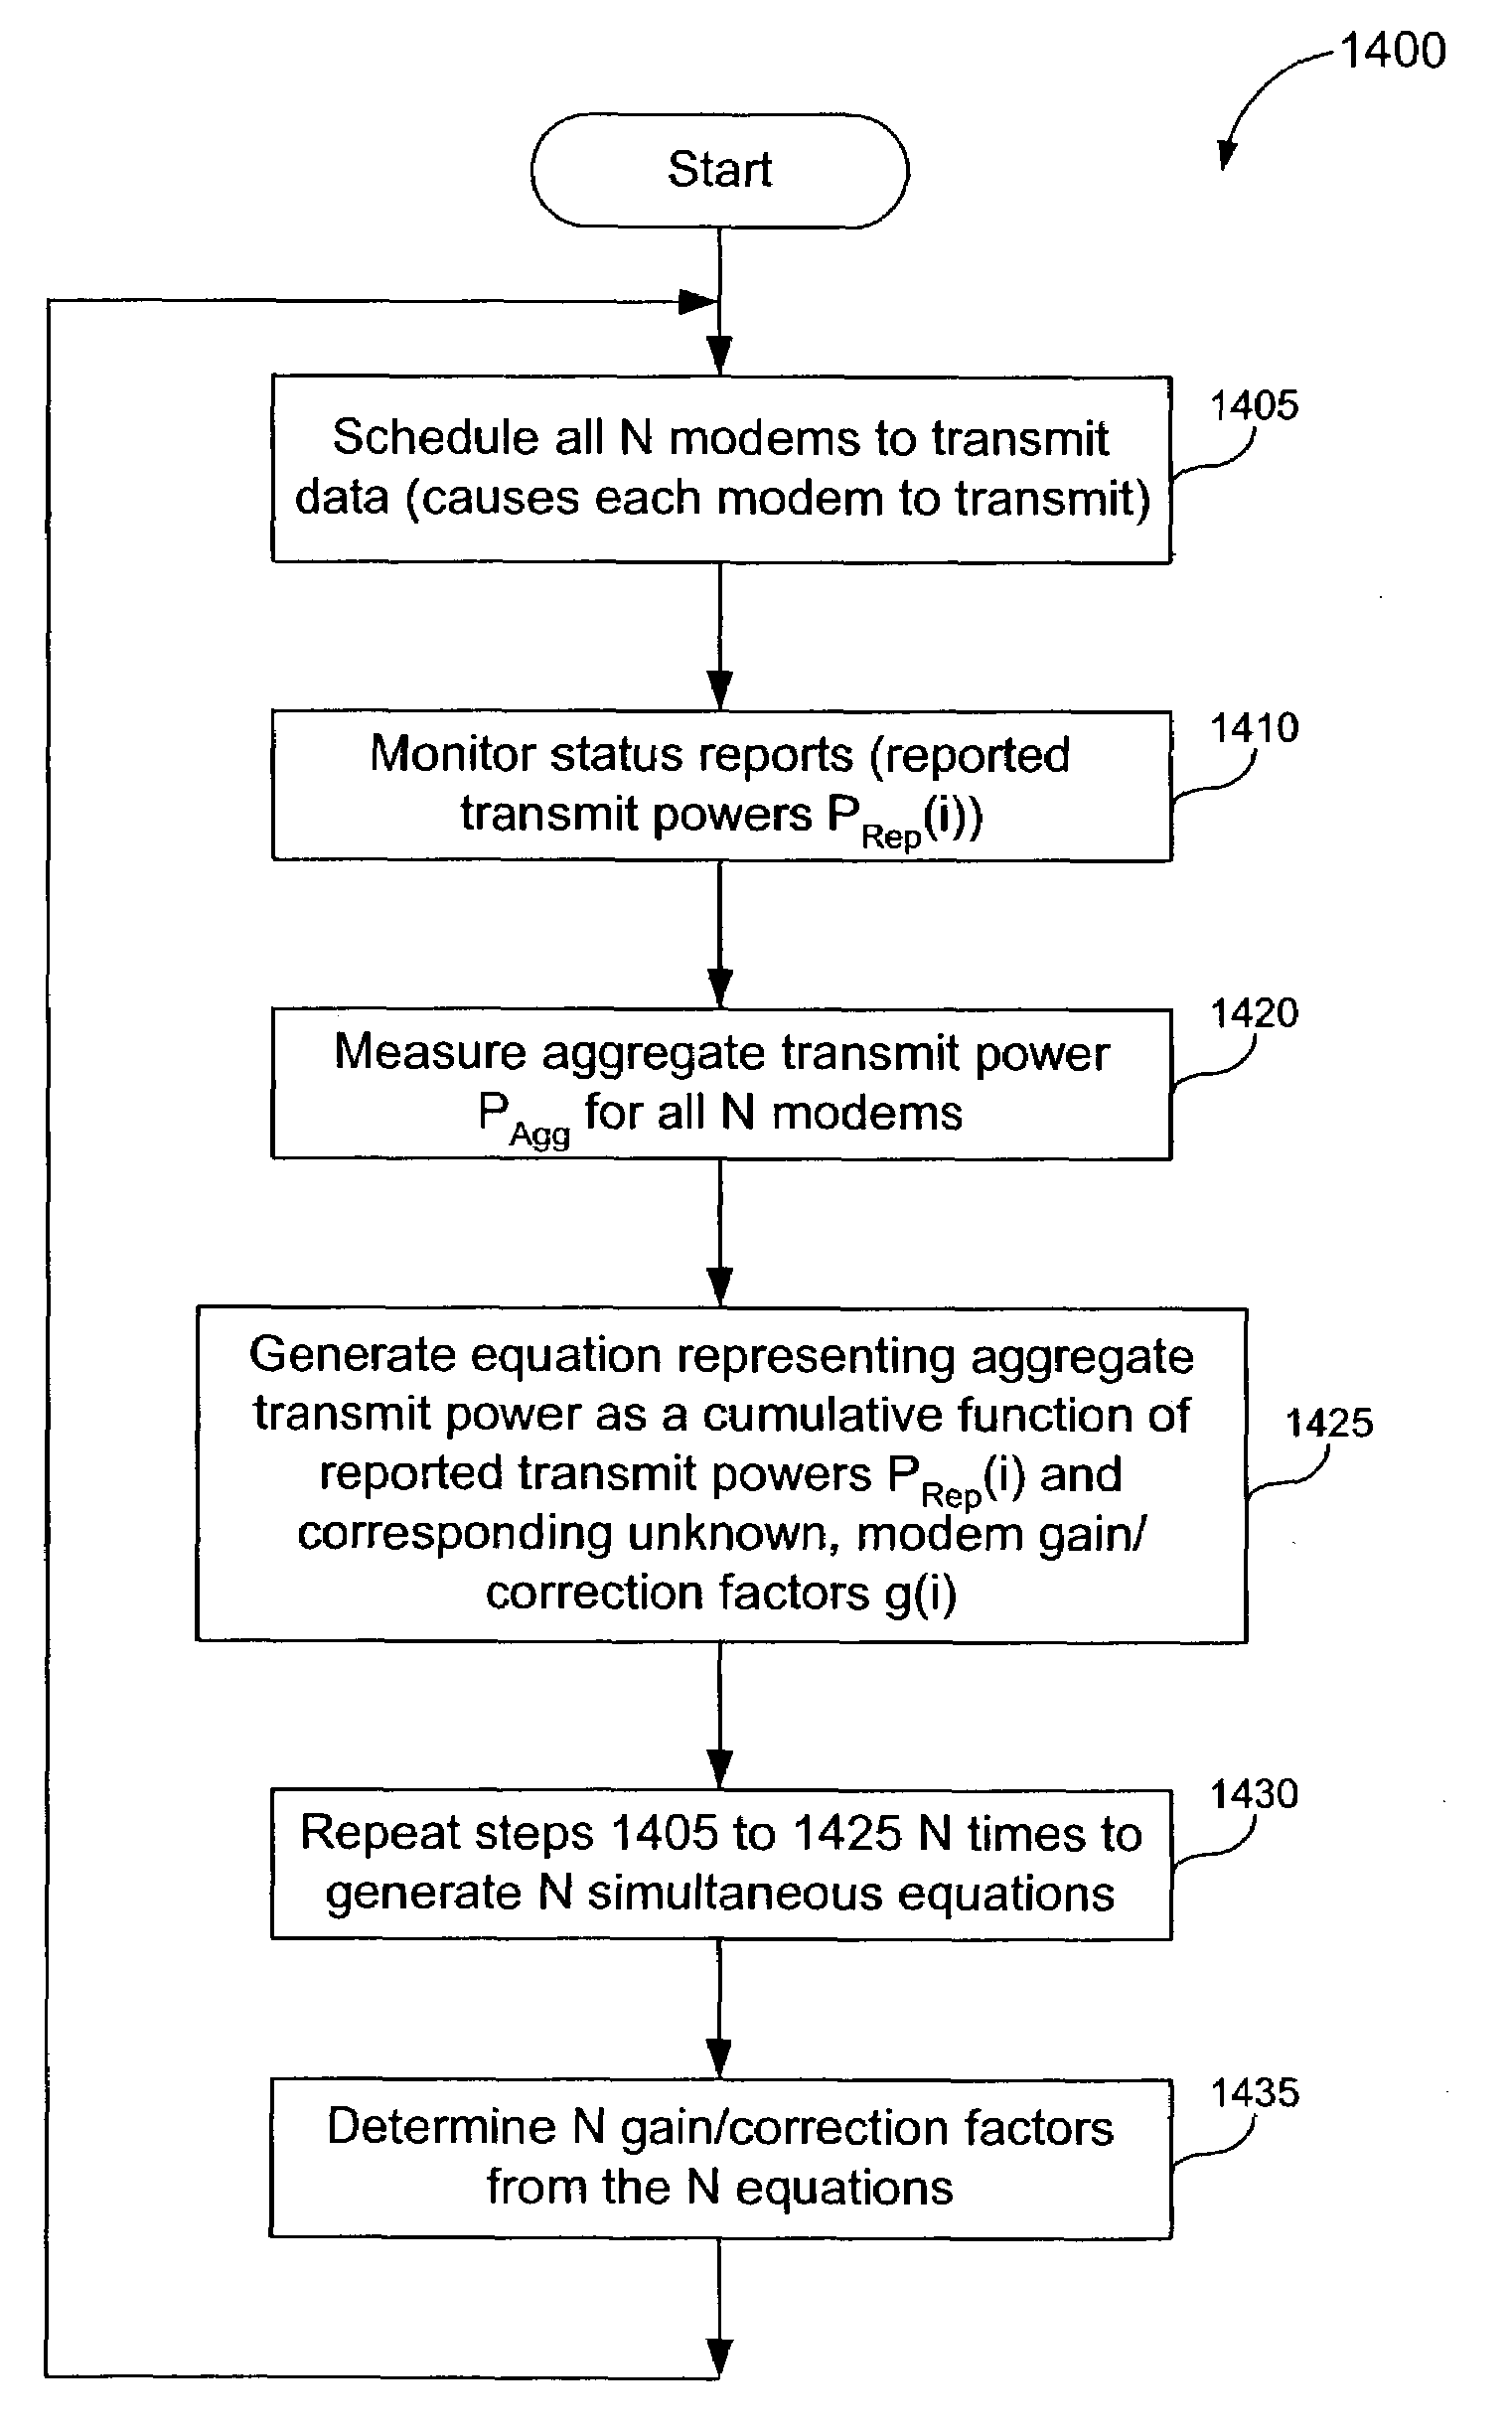 Controlling multiple modems in a wireless terminal using dynamically varying modem transmit power limits